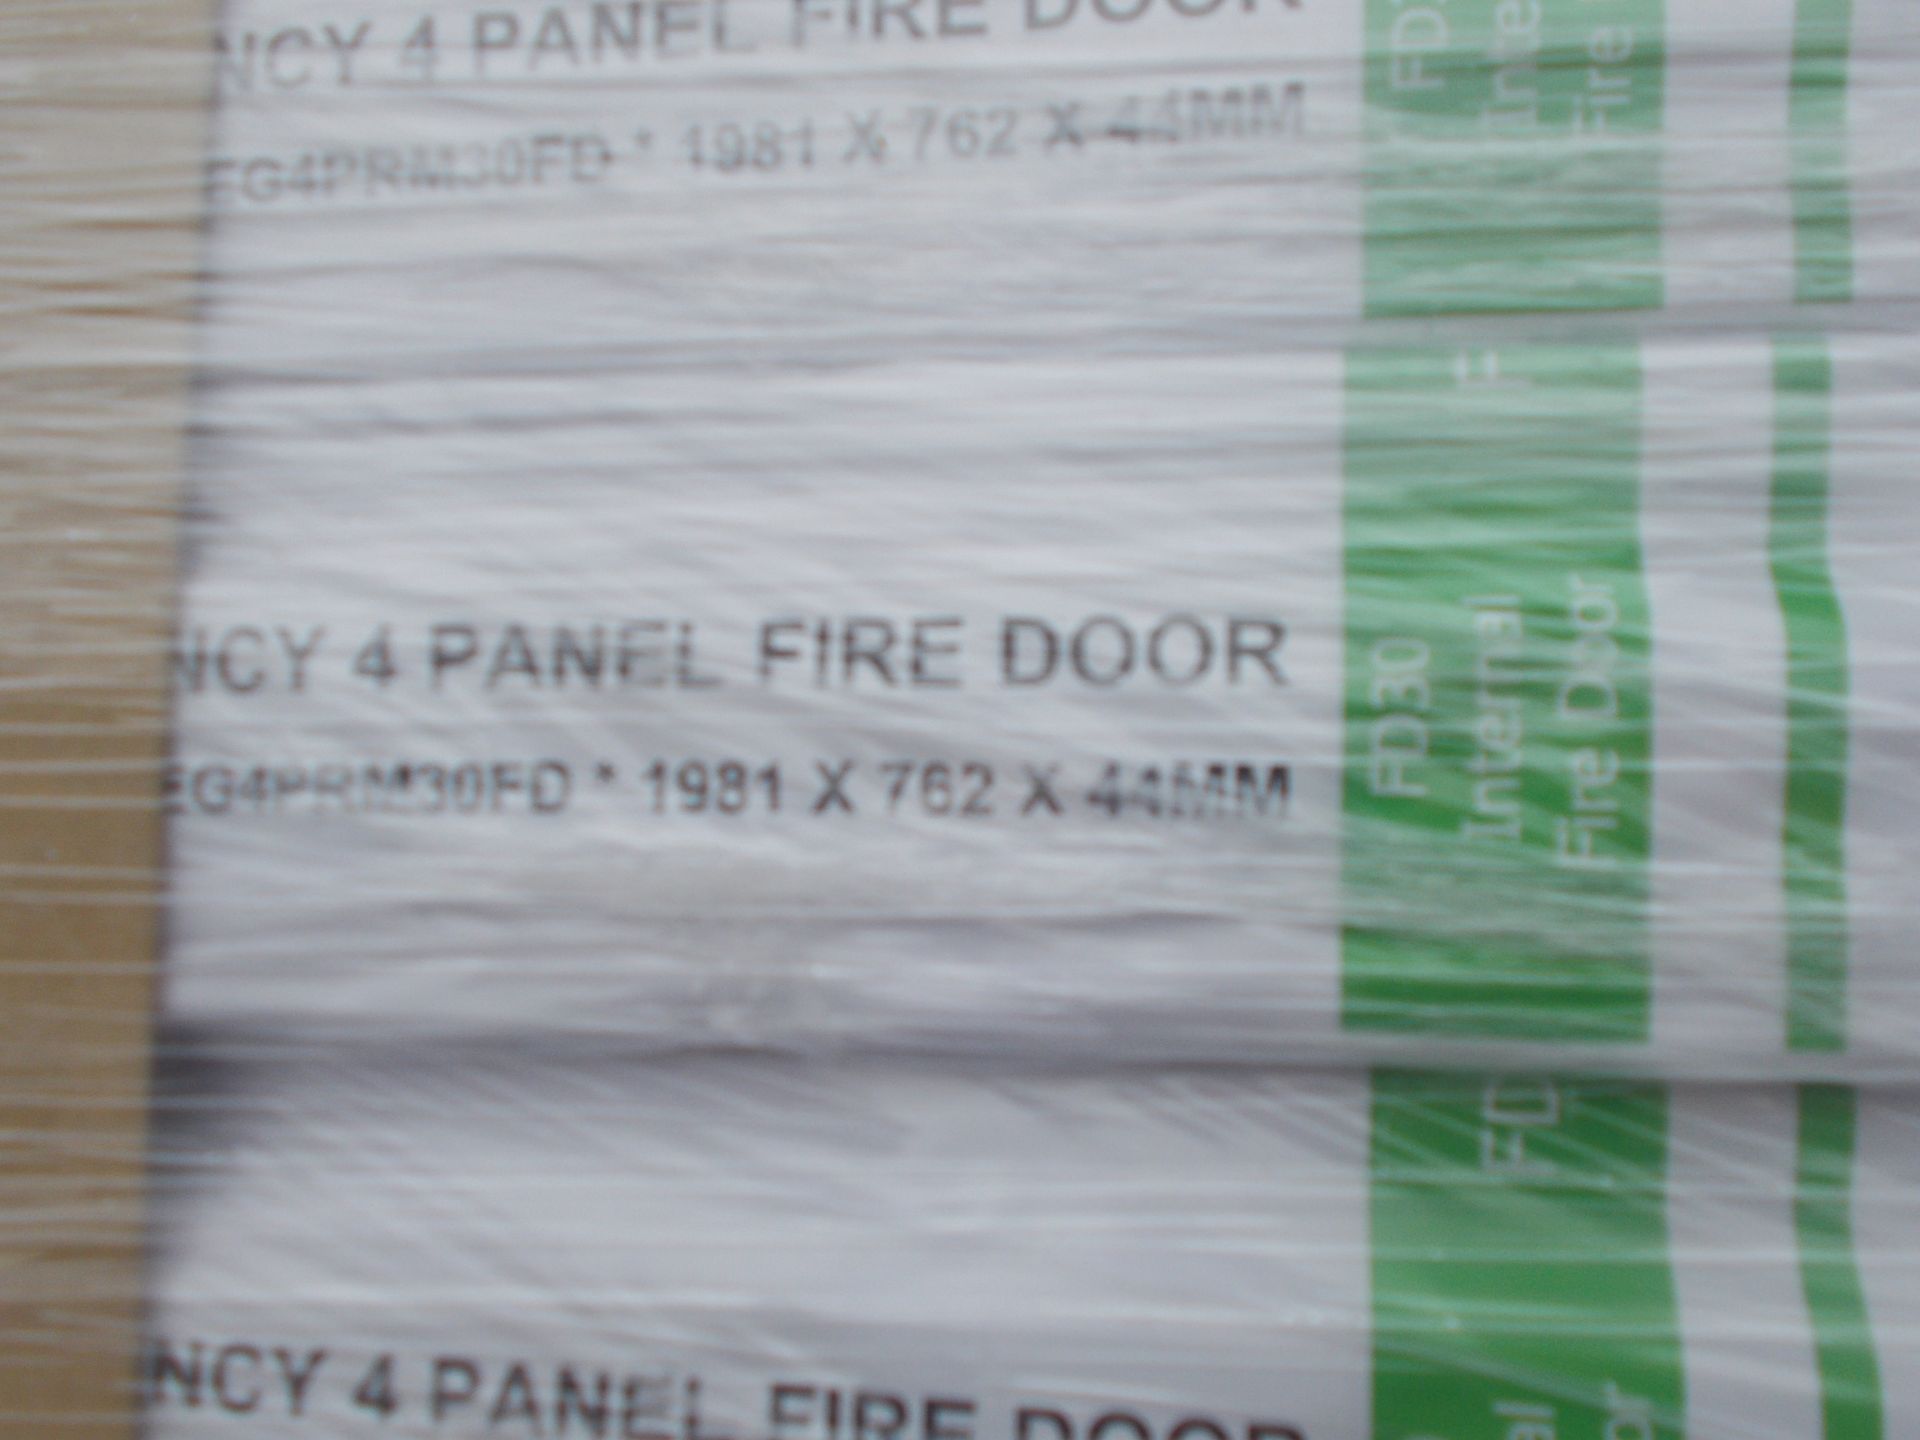 6 x Regency 4 Panel Internal Fire Door AMOREG4PRM30FD, 1981x762x44mm - Lots to be handed out in - Image 2 of 3